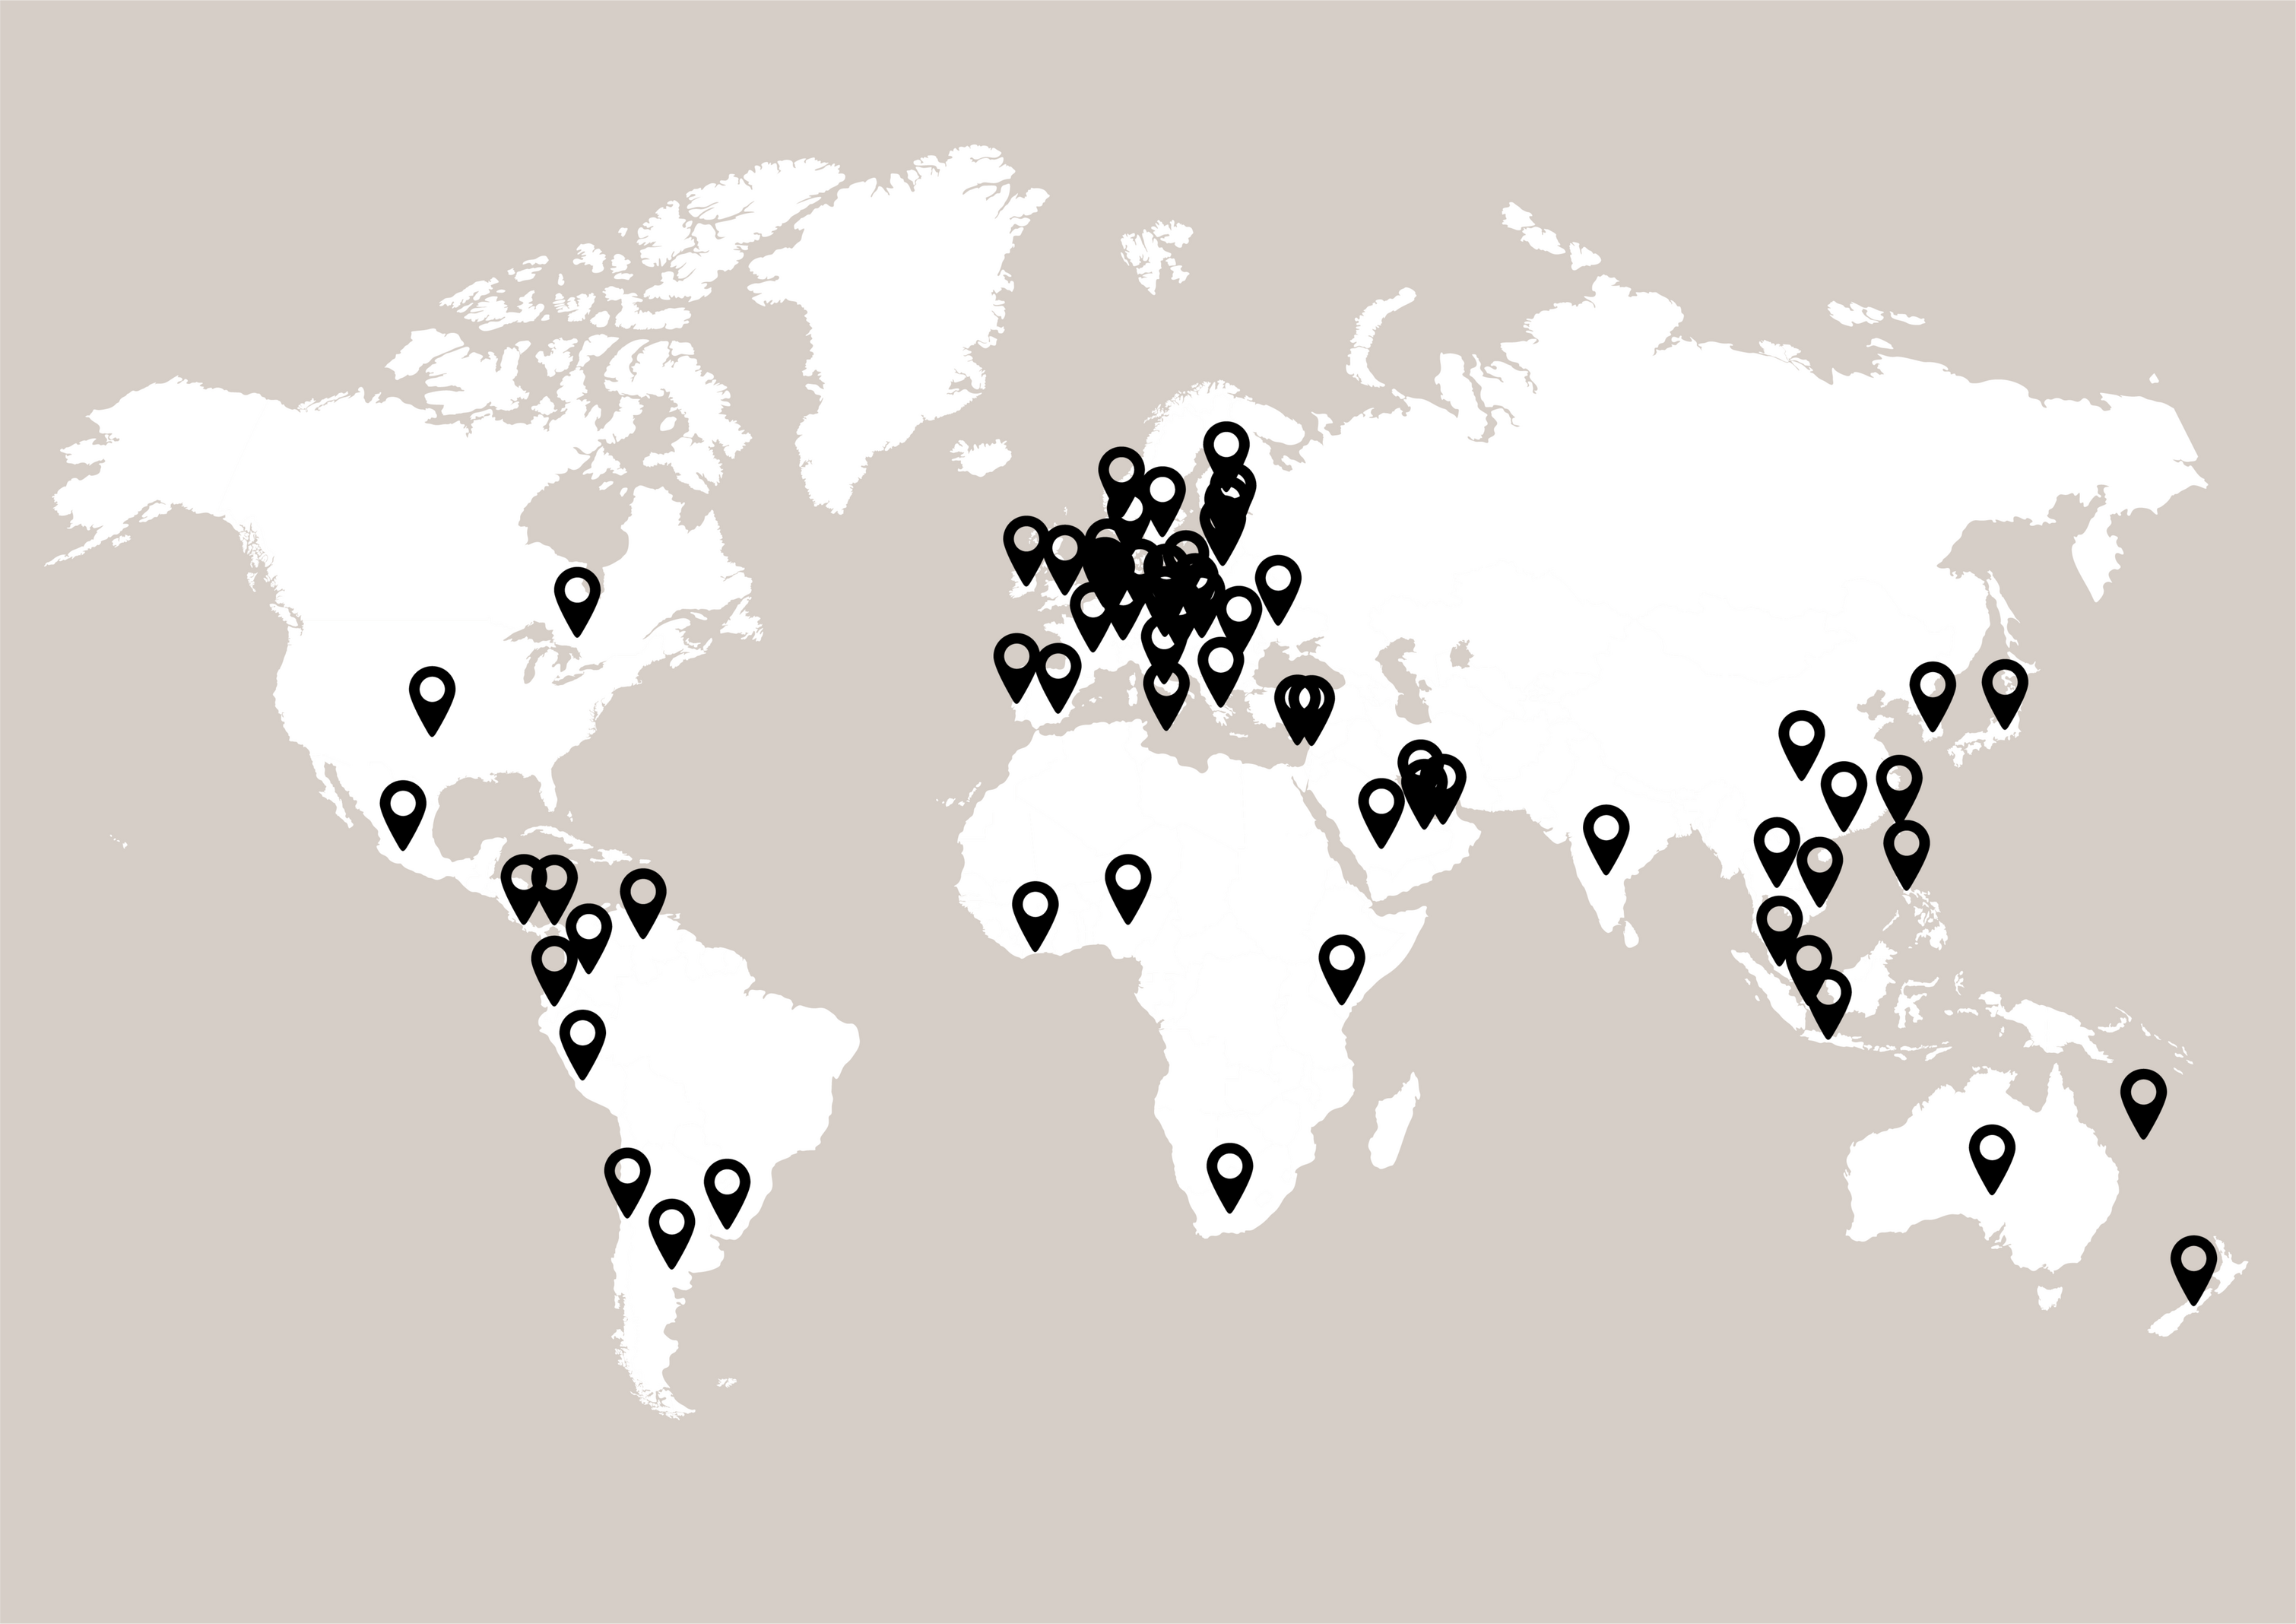 Worldmap containing location markers for BoConcept stores around the world.